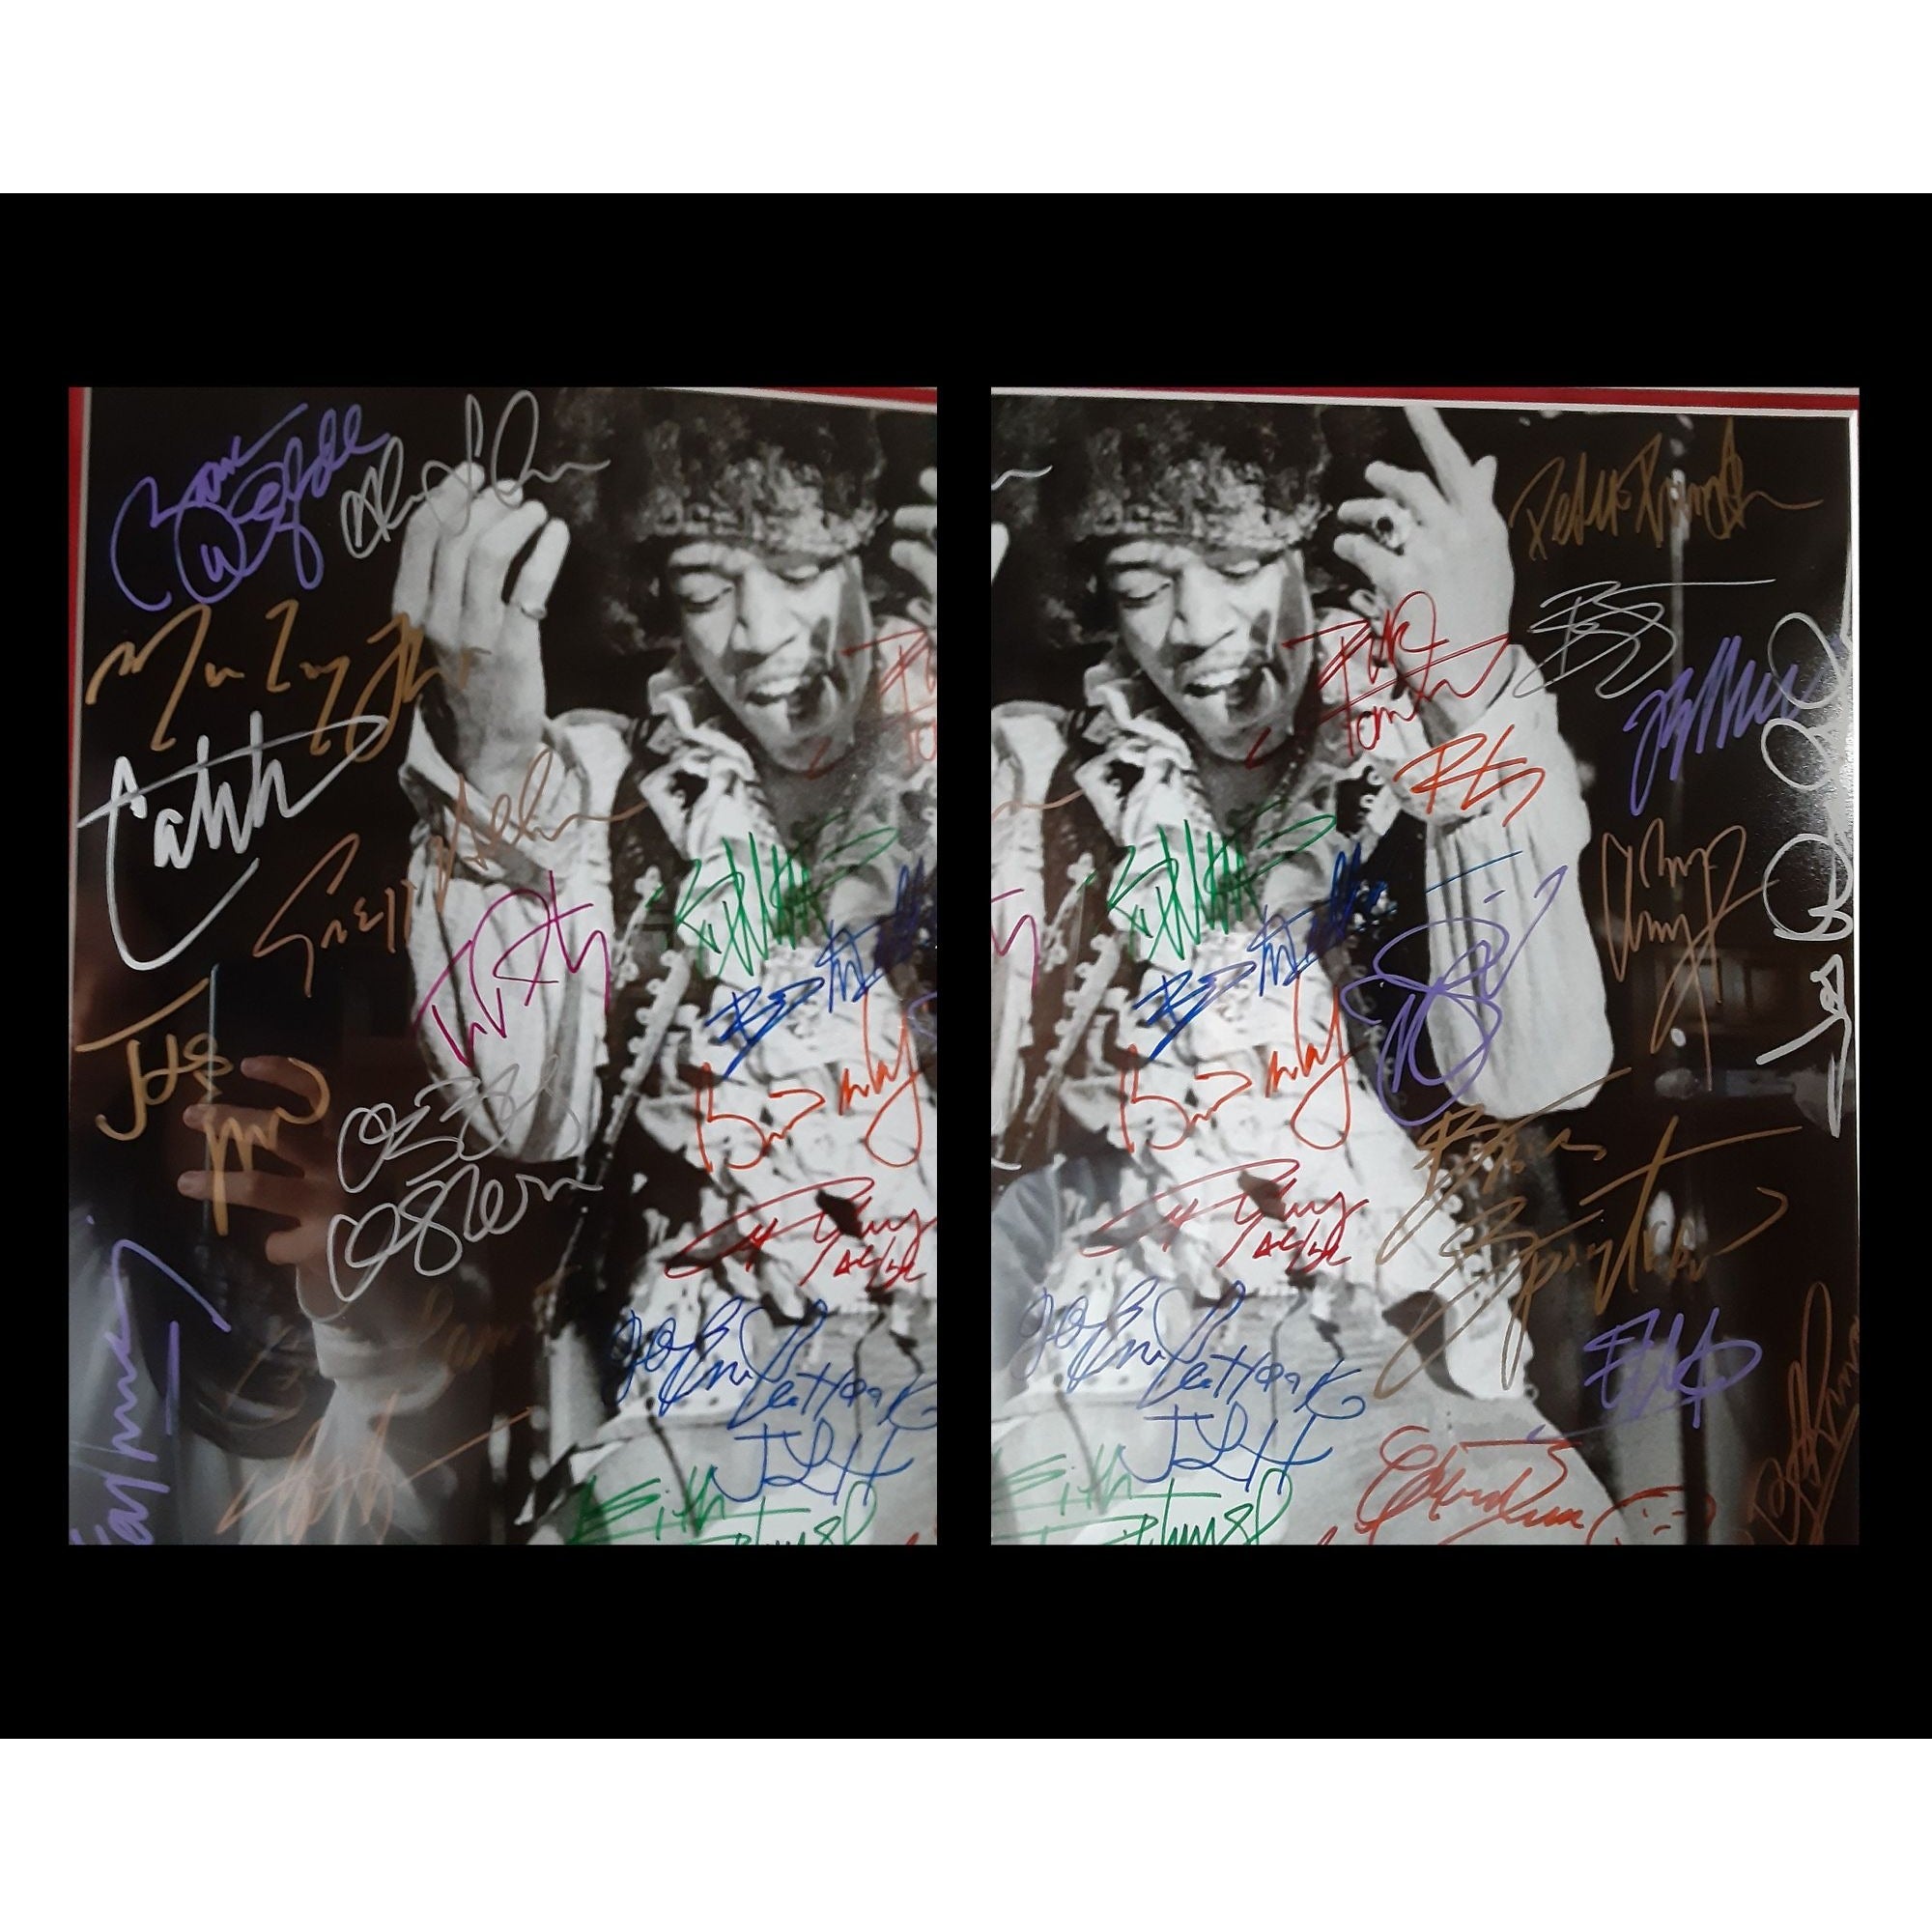 Jimi Hendrix Jimmy Page Paul McCartney 34 guitar legends signed photo with proof